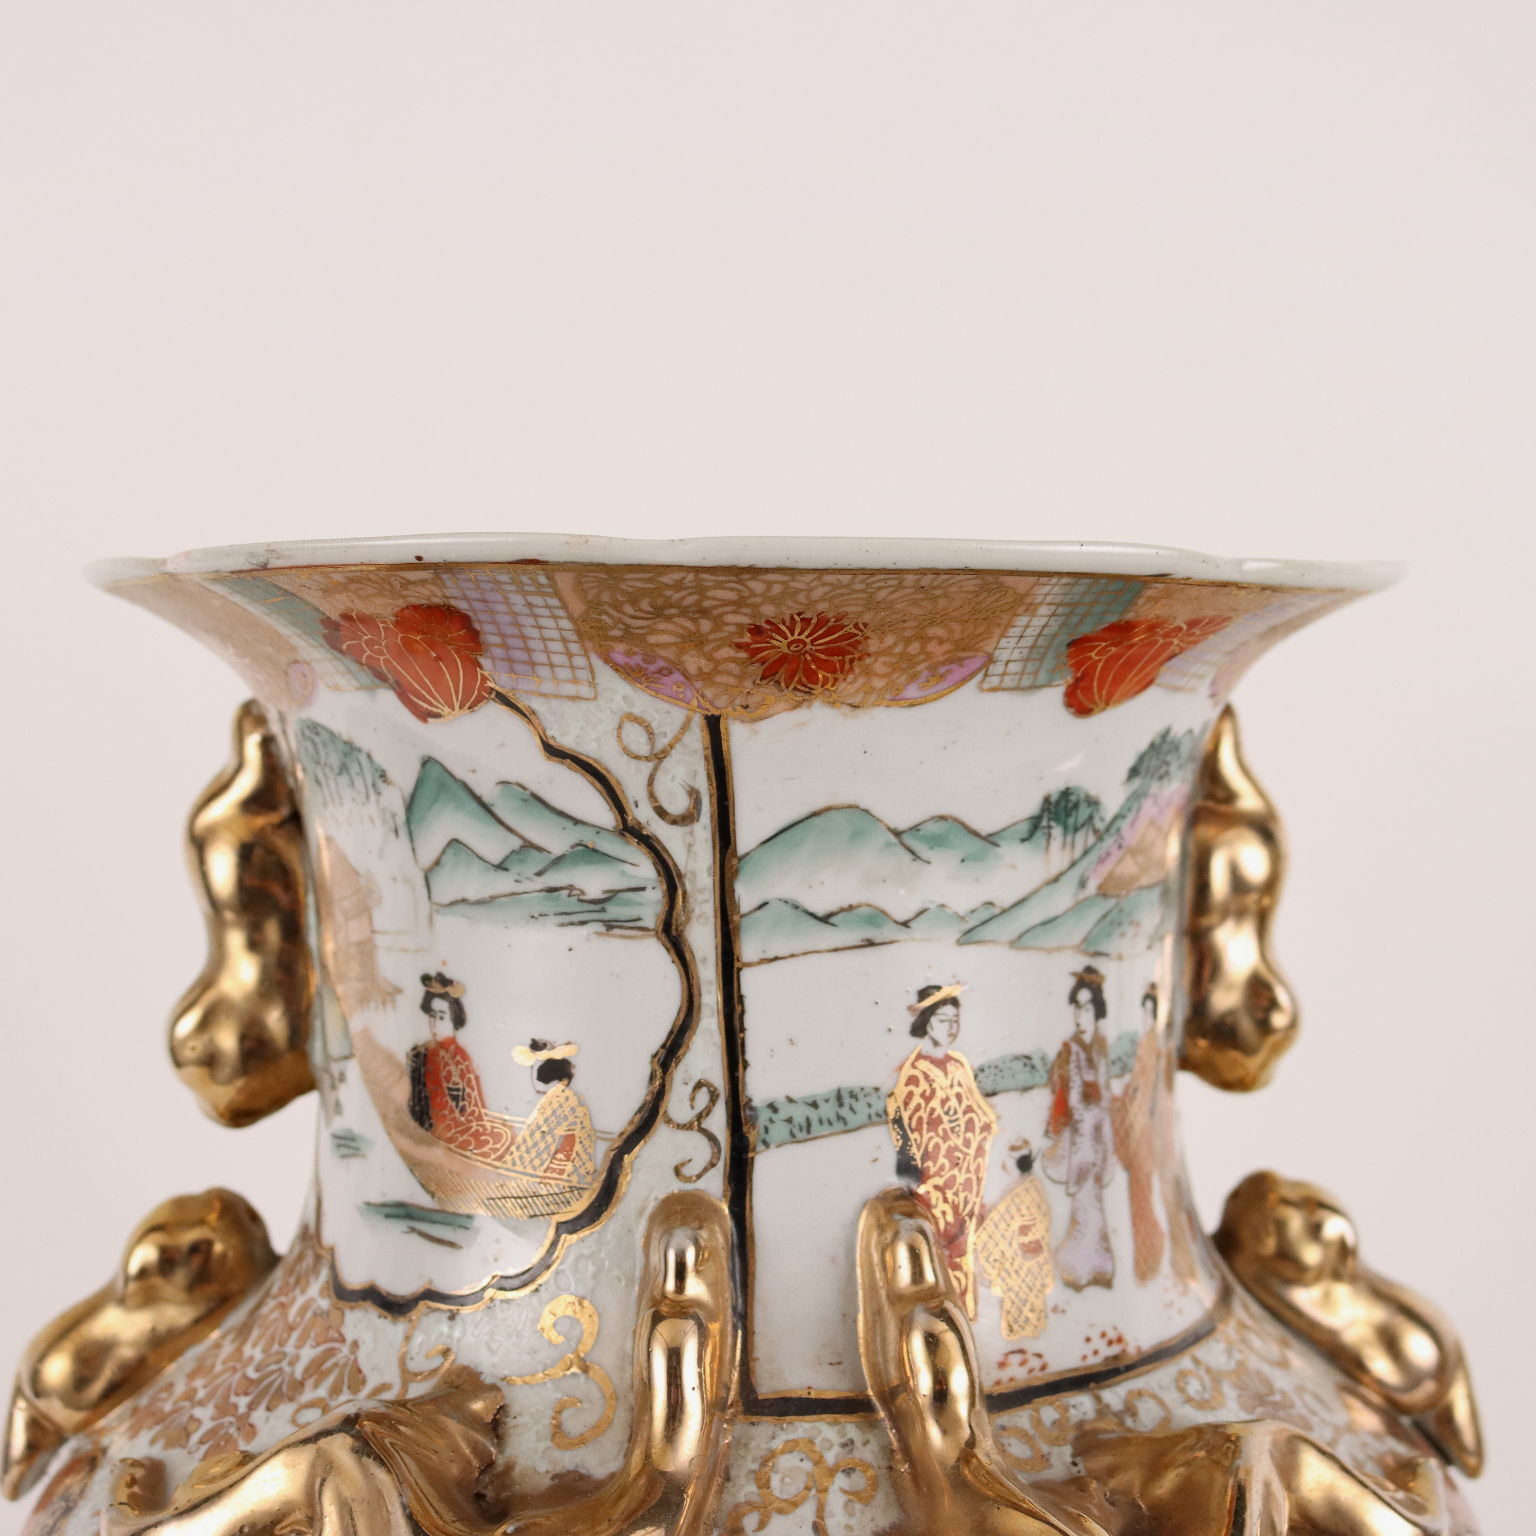 Chinese Brass Vase with Dragons, 1920s for sale at Pamono